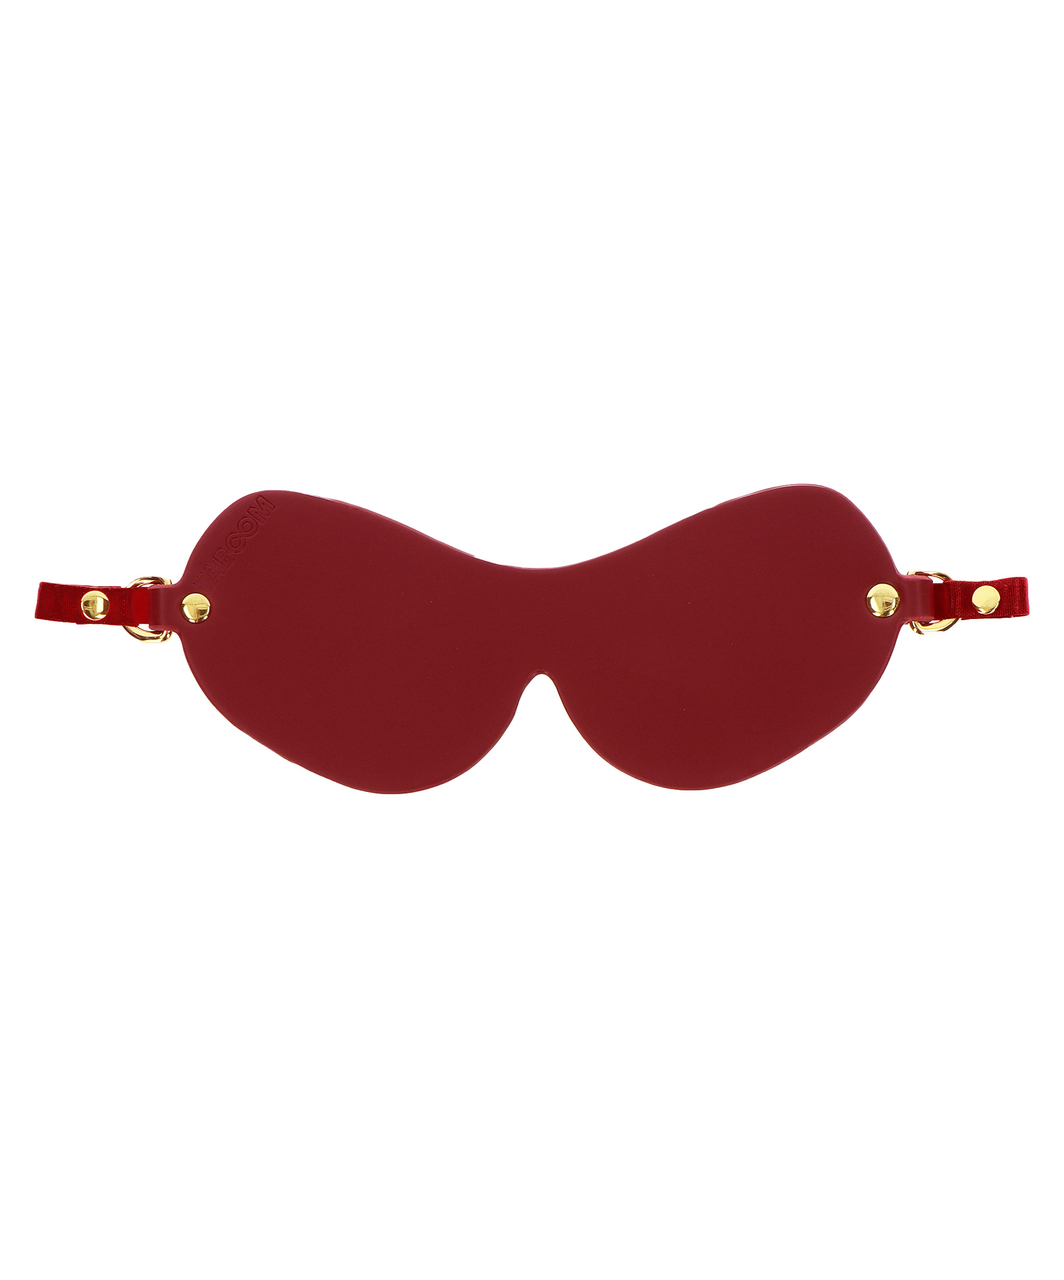 Taboom burgundy faux leather blindfold